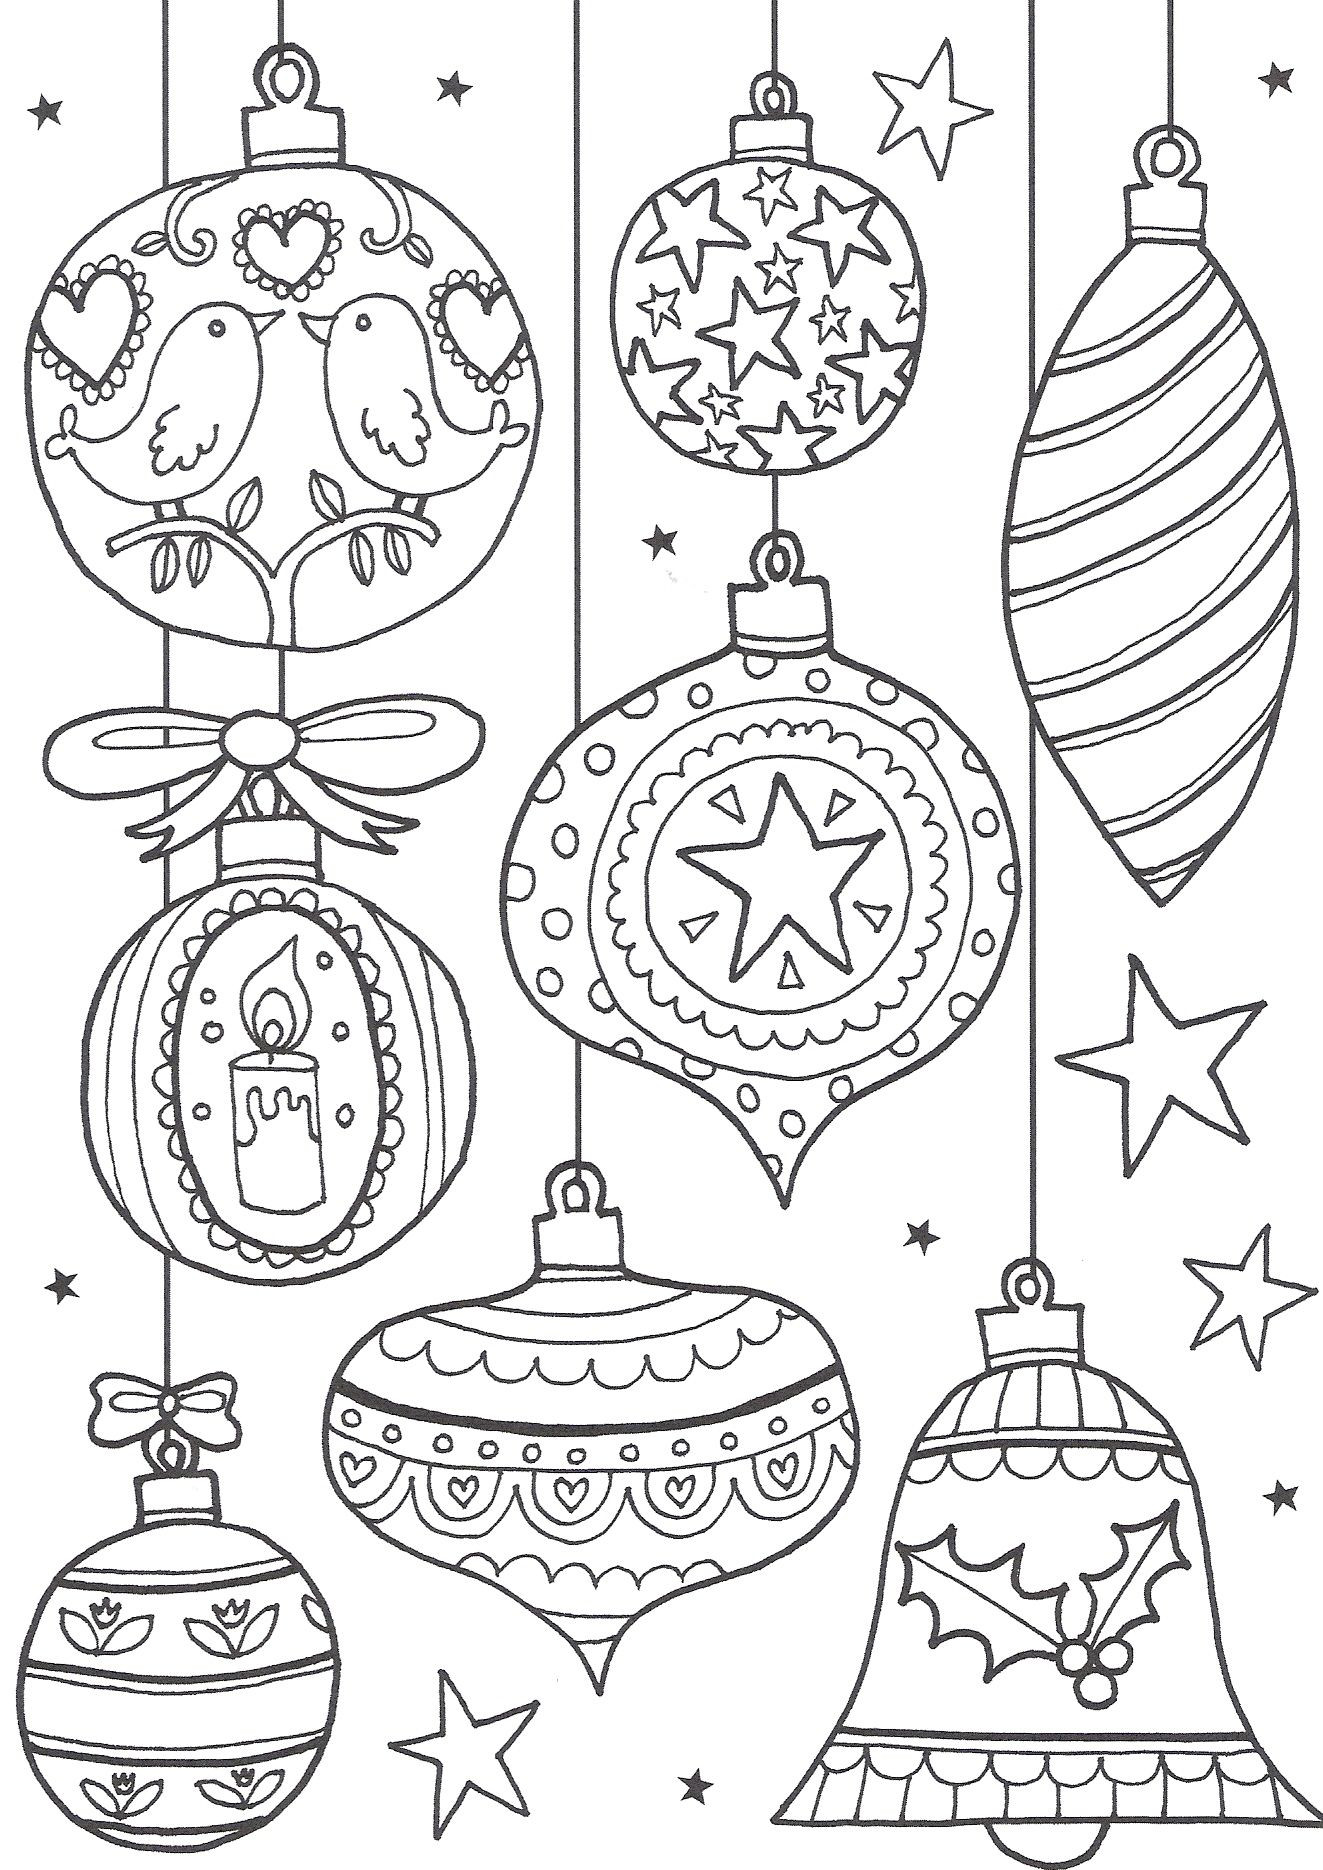 Christmas Coloring Pages Free
 Free Christmas Colouring Pages for Adults The Ultimate